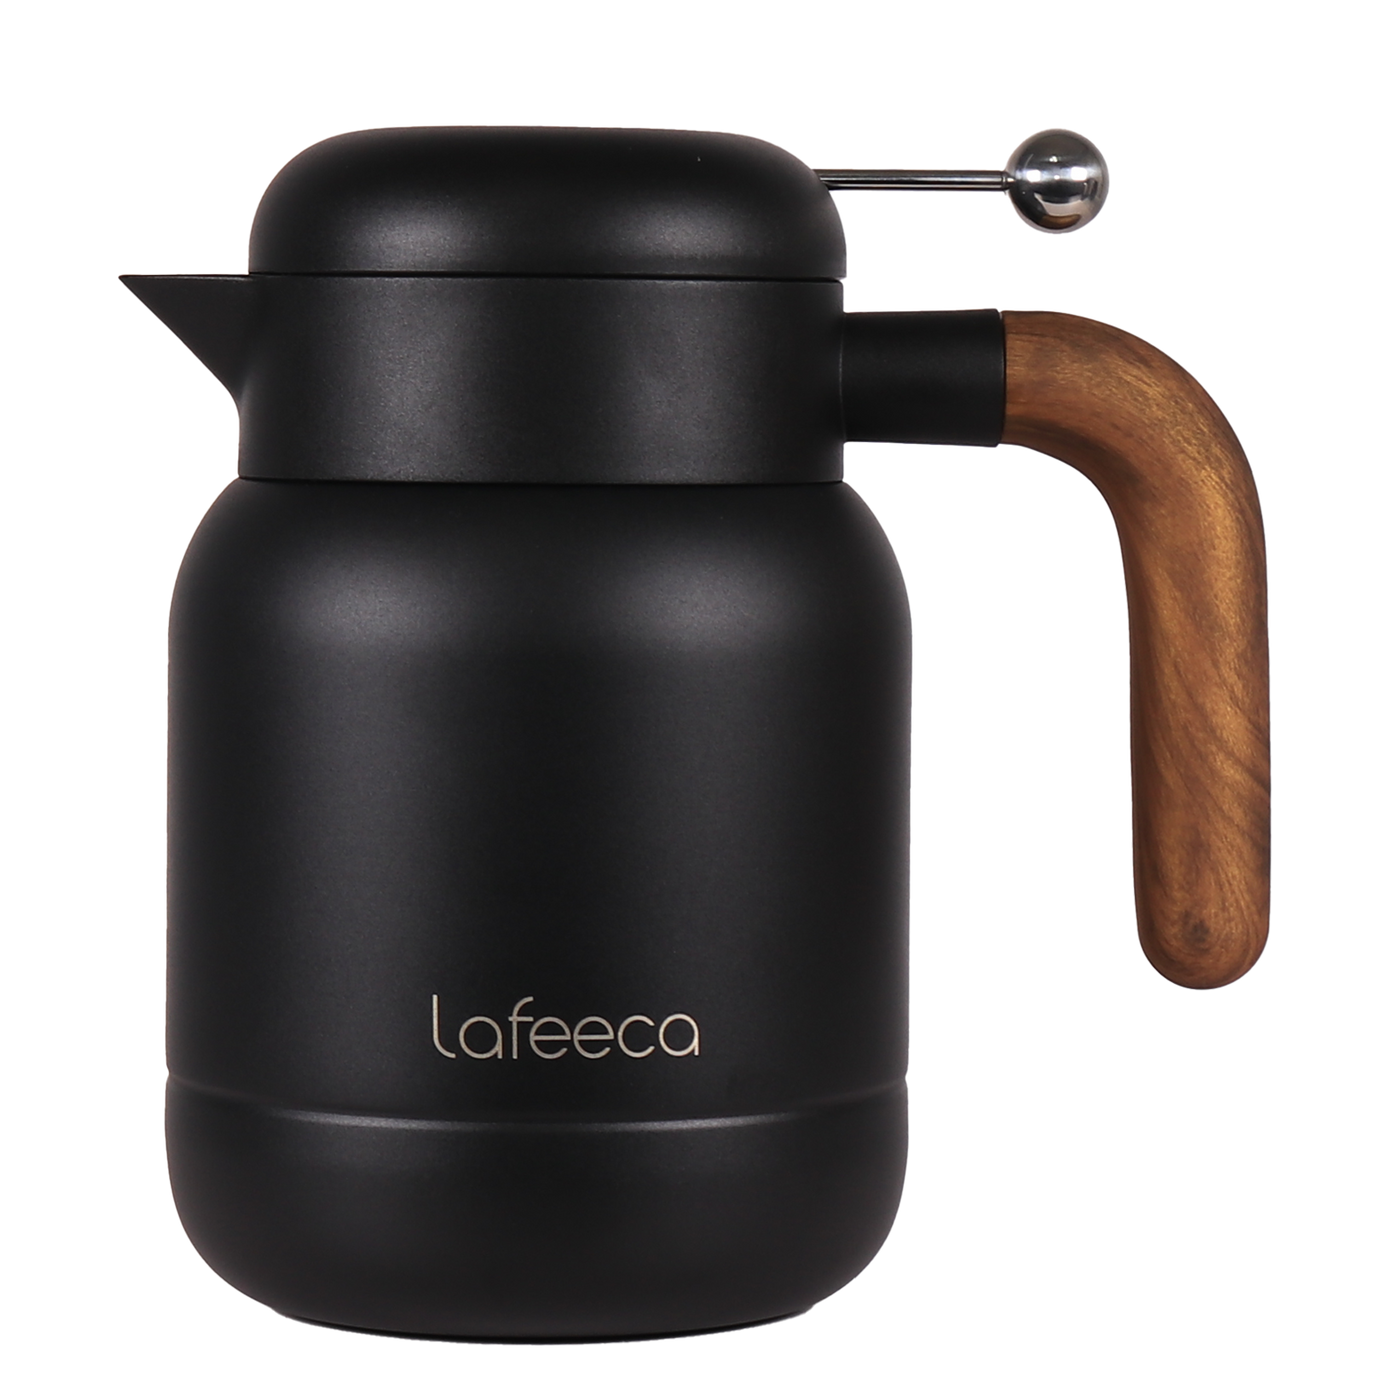 35 oz Thermal Coffee Carafe, Double Wall Vacuum Coffee Thermos